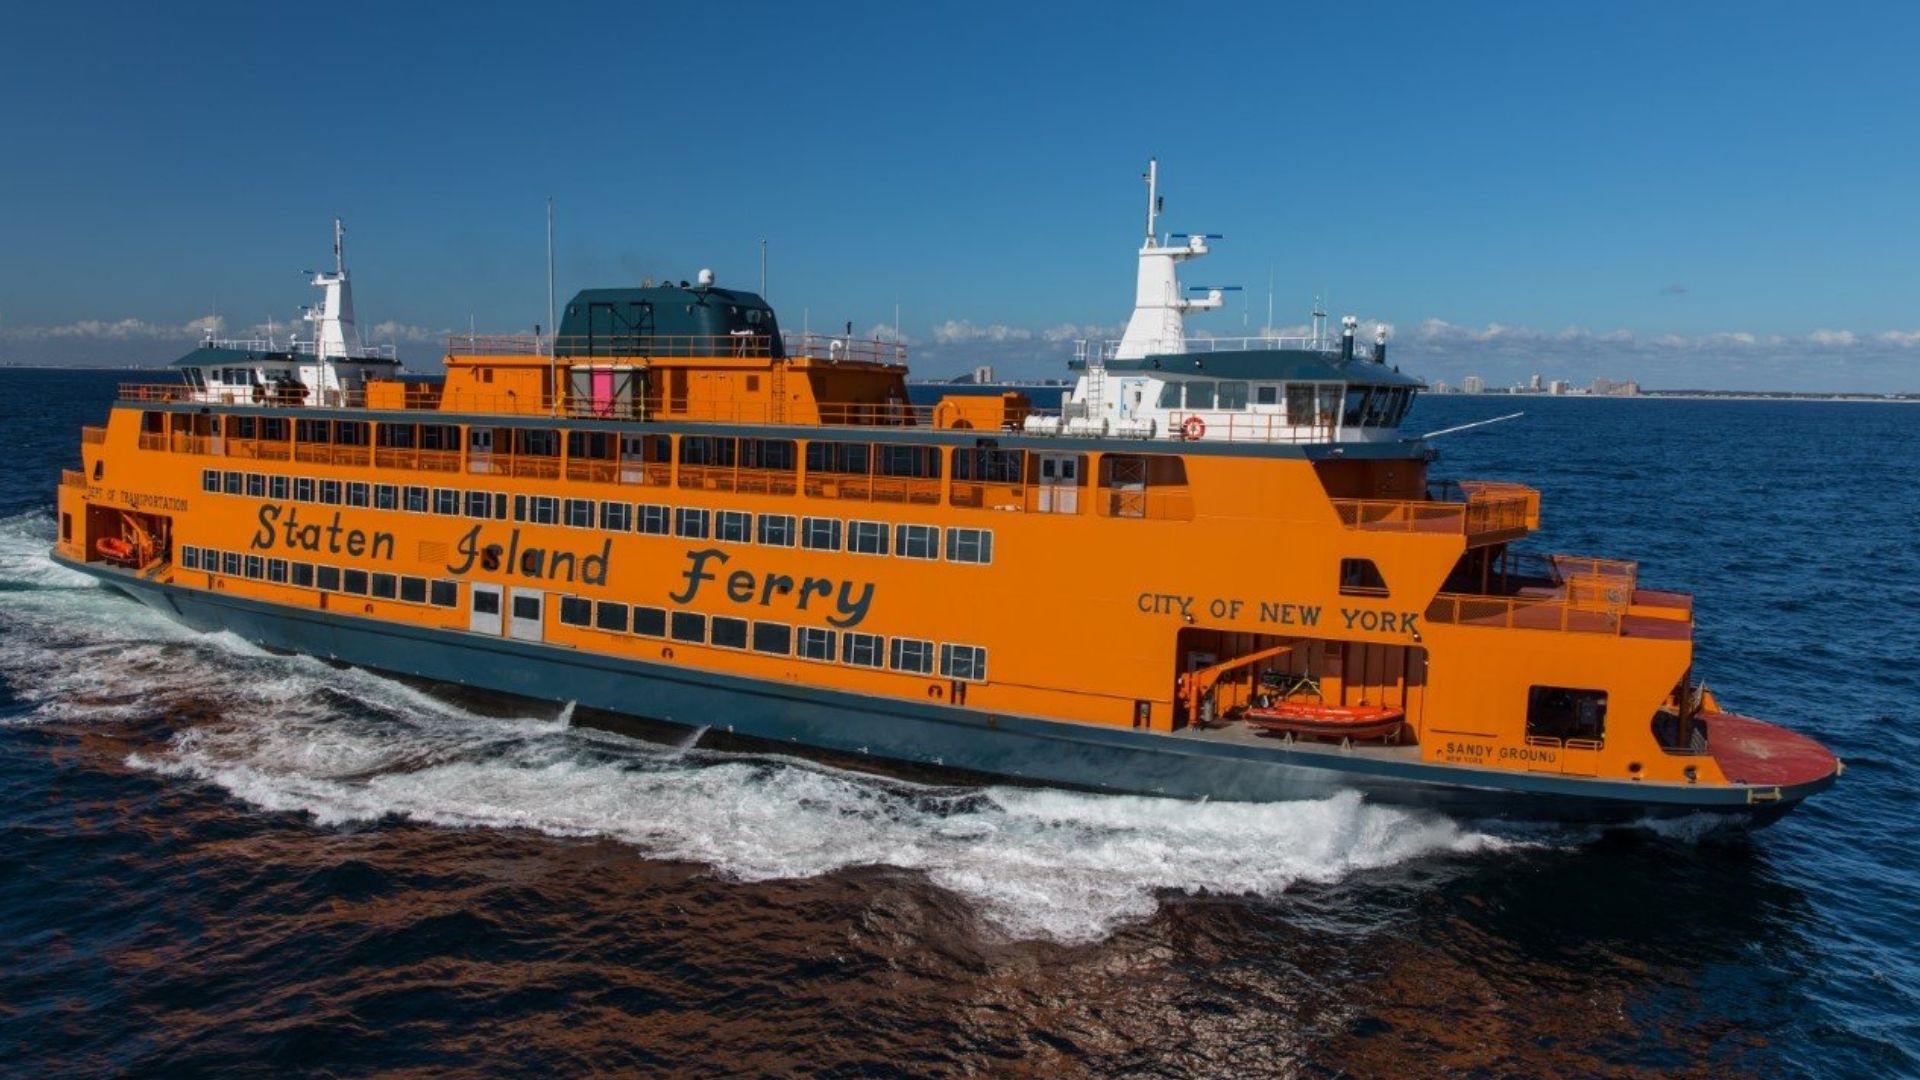 Boat built in Bay County to become the new Staten Island ferry